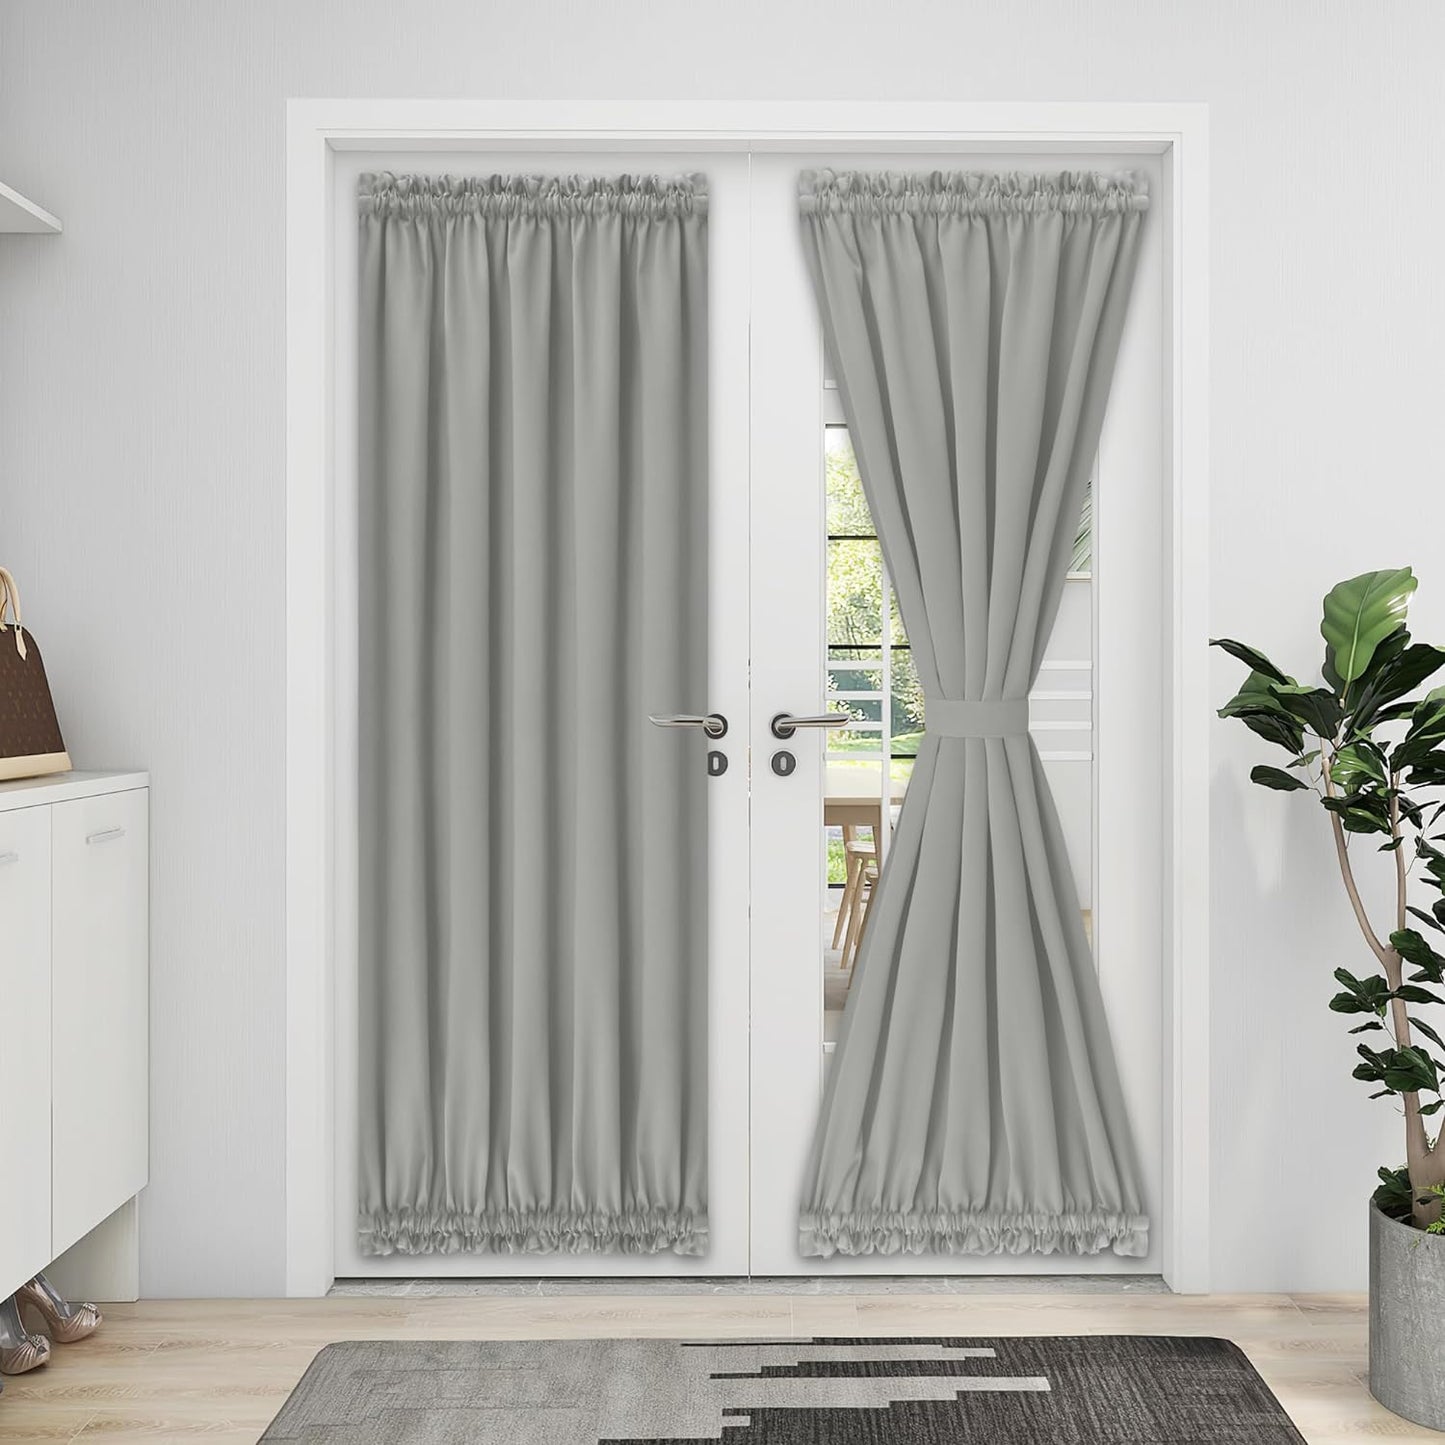 Easy-Going Blackout Door Curtains, Rod Pocket Privacy Light Filtering Sidelight Curtains French Door Curtains with Tieback, 1 Panel, 25X40 Inch, Gray  Easy-Going Light Gray W52 X L72 Inch 